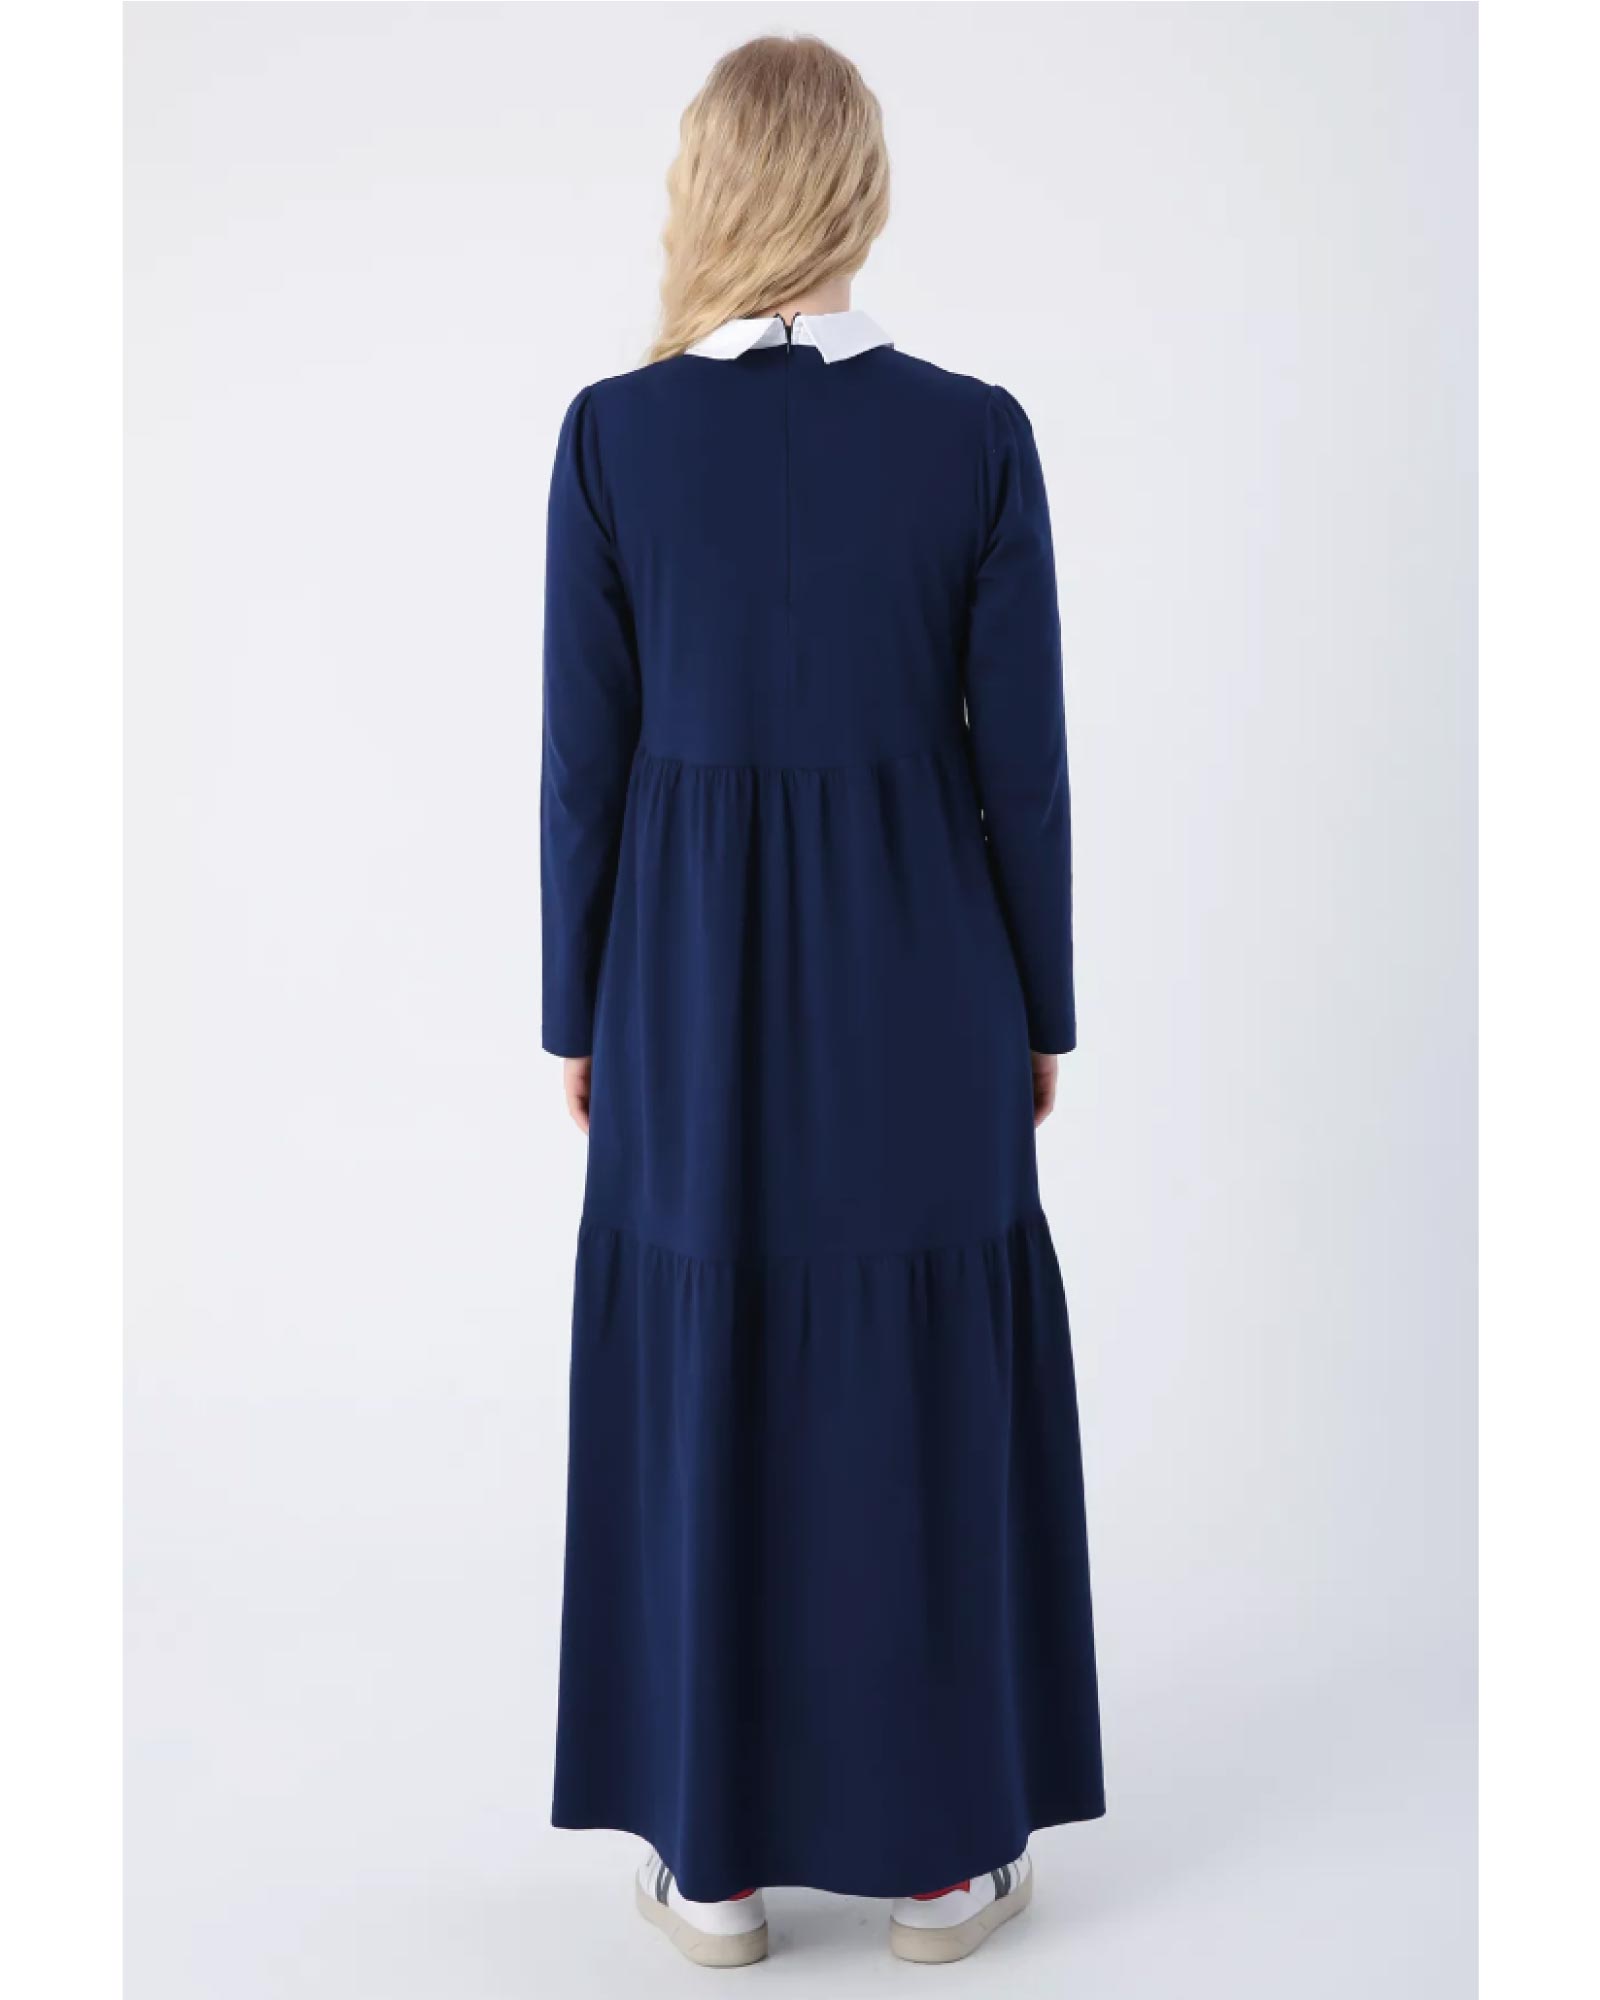 Hijab Dress Cotton dress with a classic shirt collar, practical pockets and charming ruffles